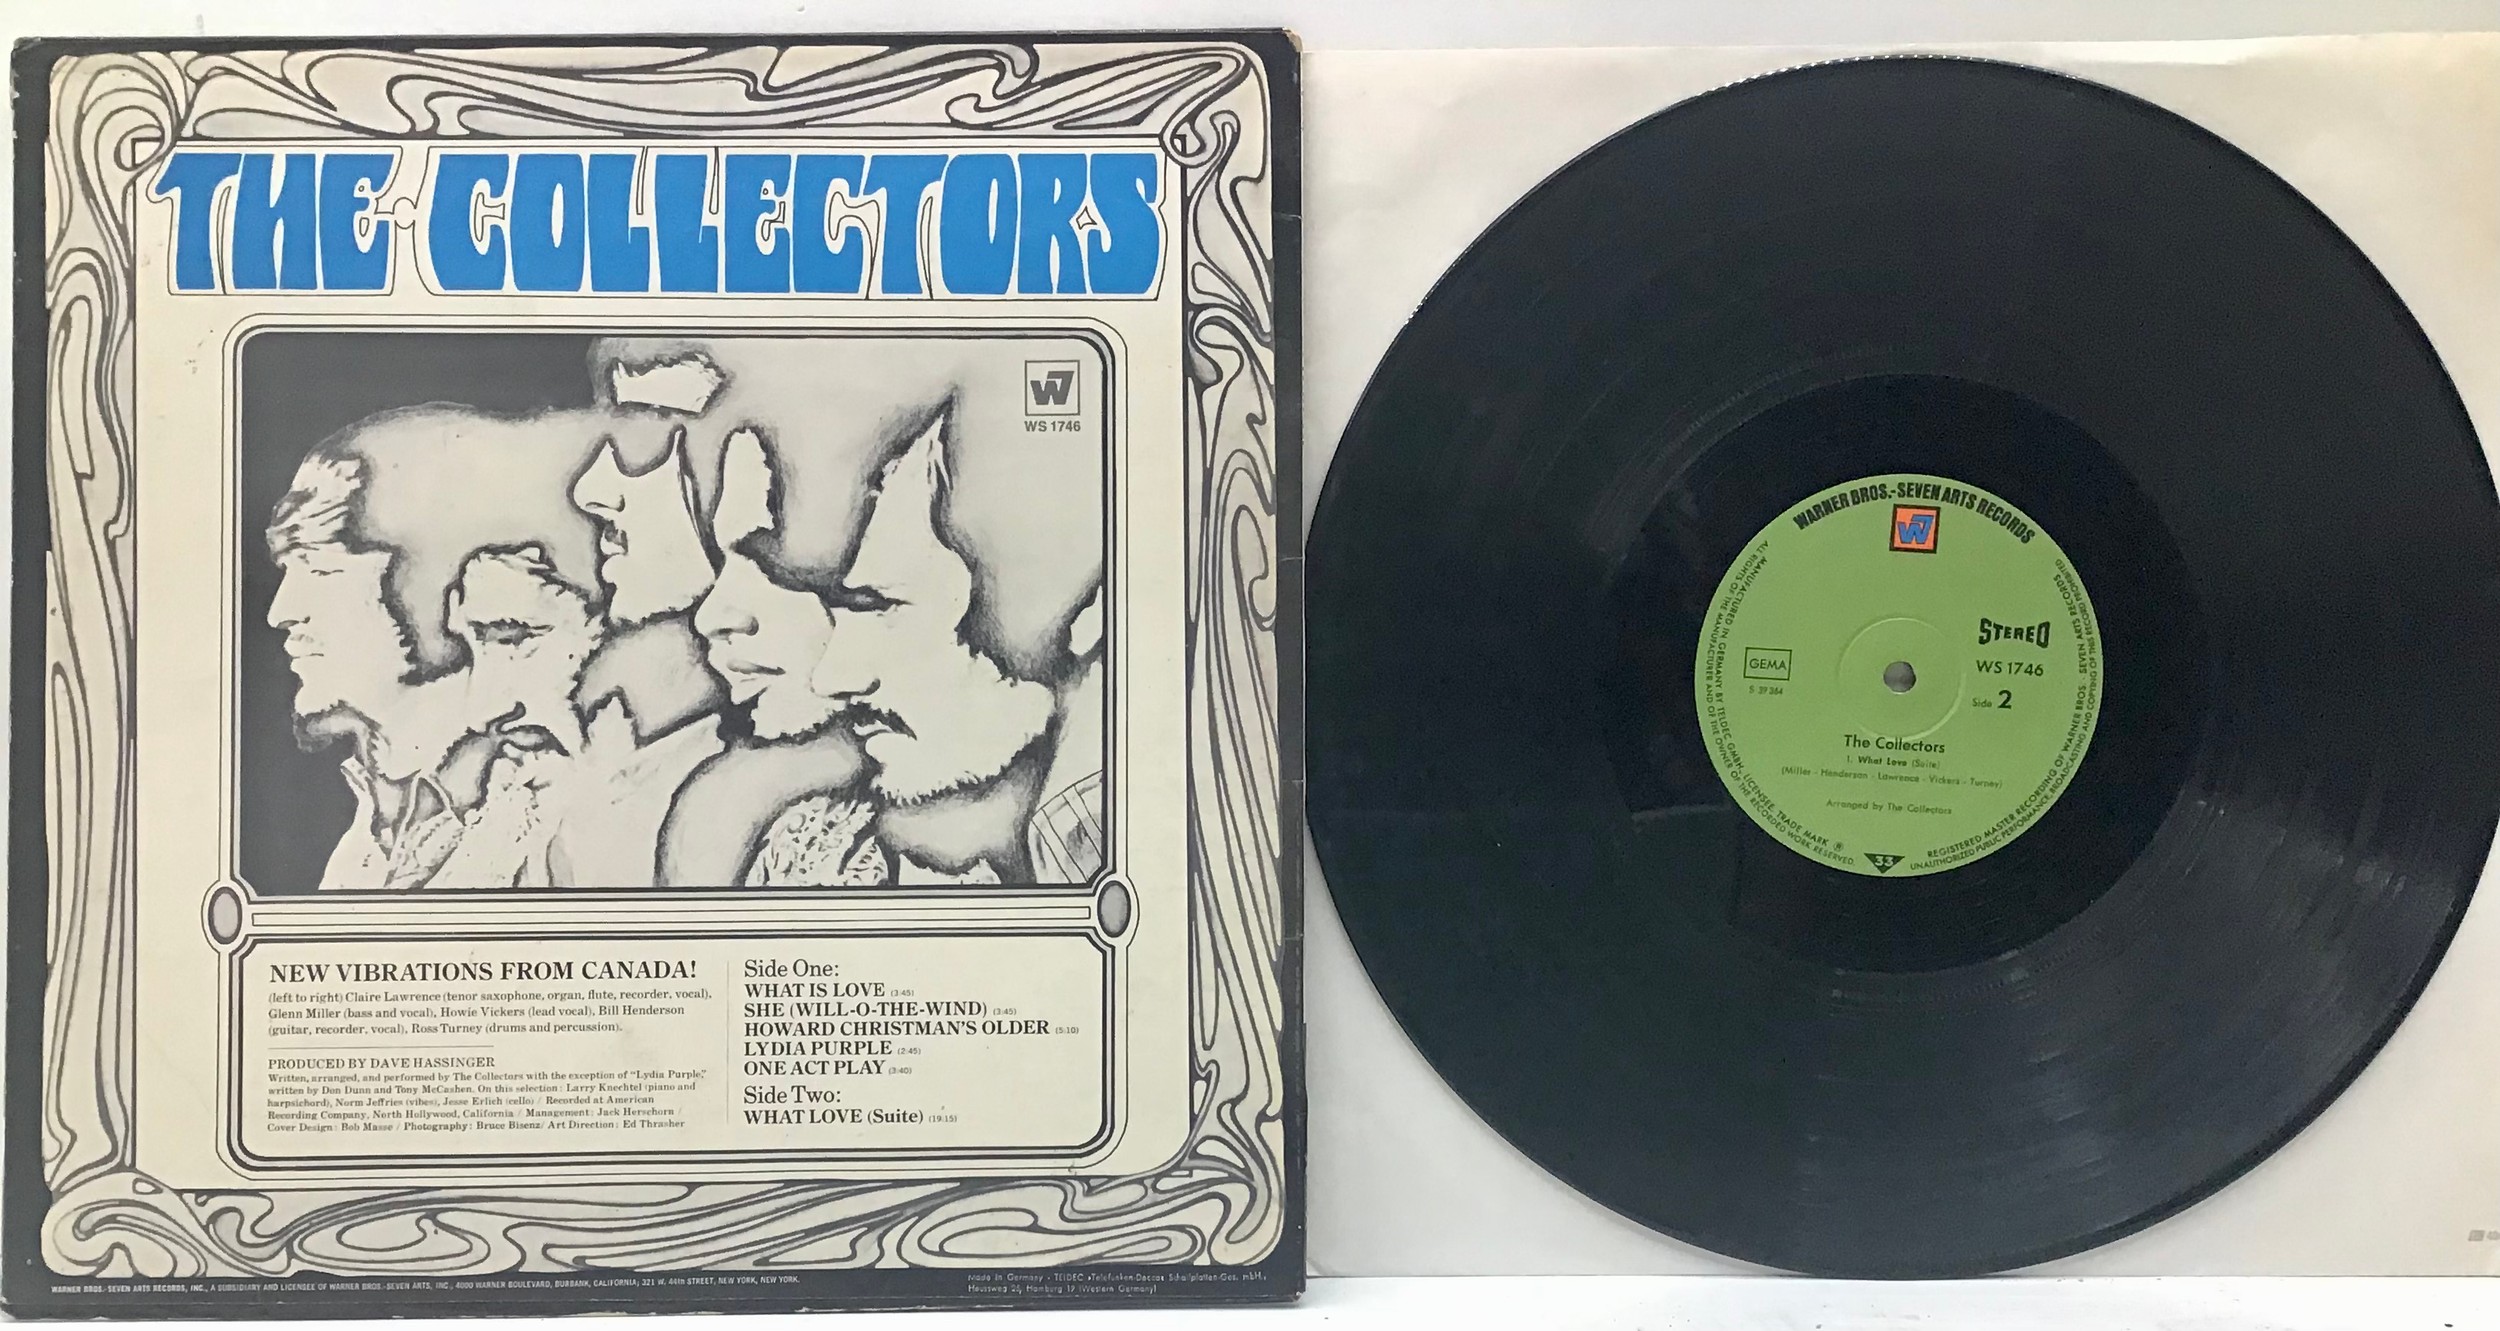 THE COLLECTORS SELF TITLED VINYL 33 RPM RECORD. A fantastic copy of this Canadian psych / acid - Image 2 of 2